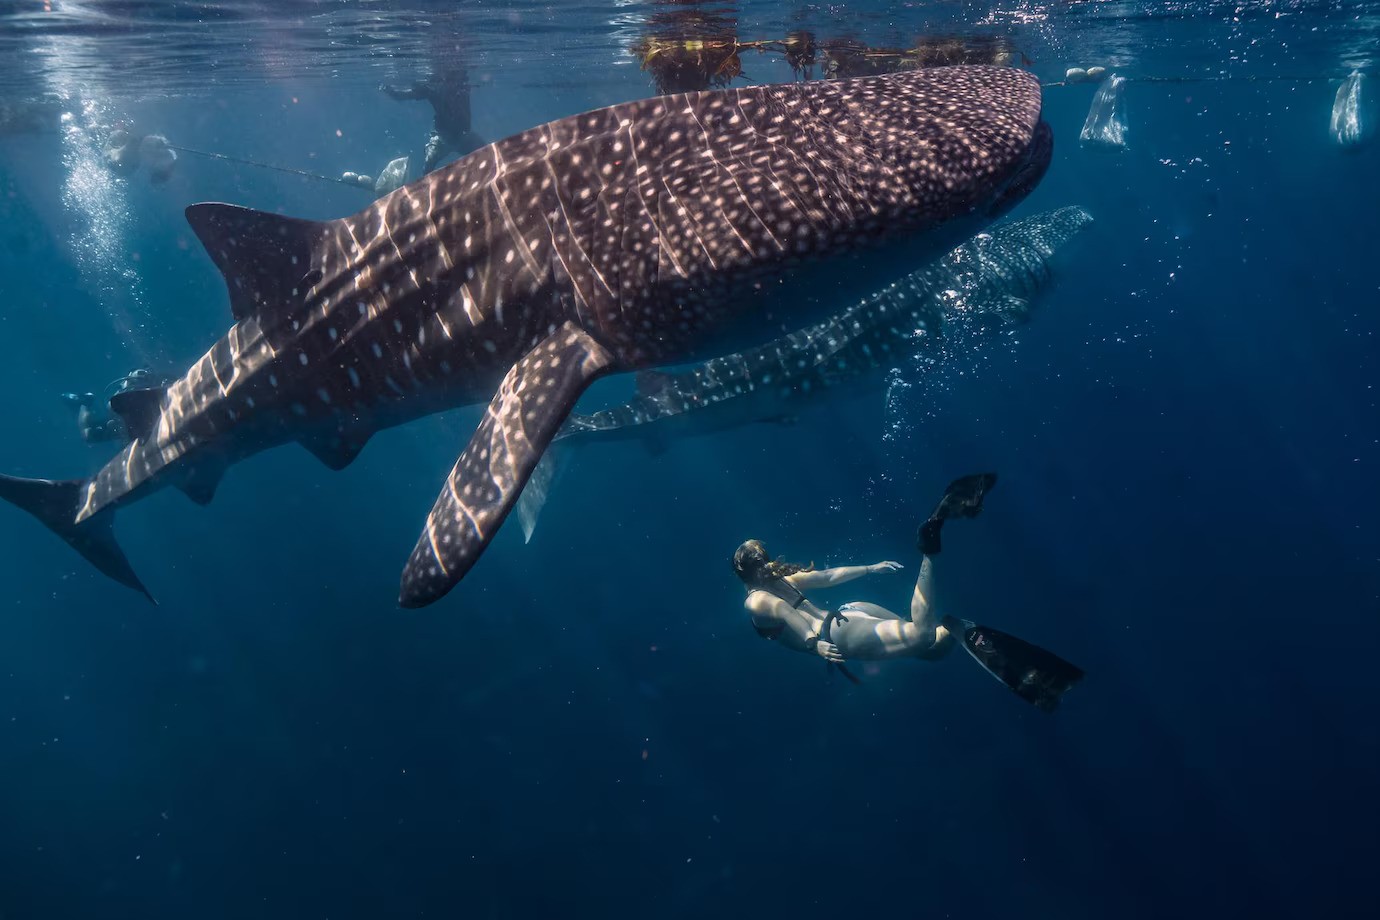 A photo of a female diver's encounter with a whale shark.